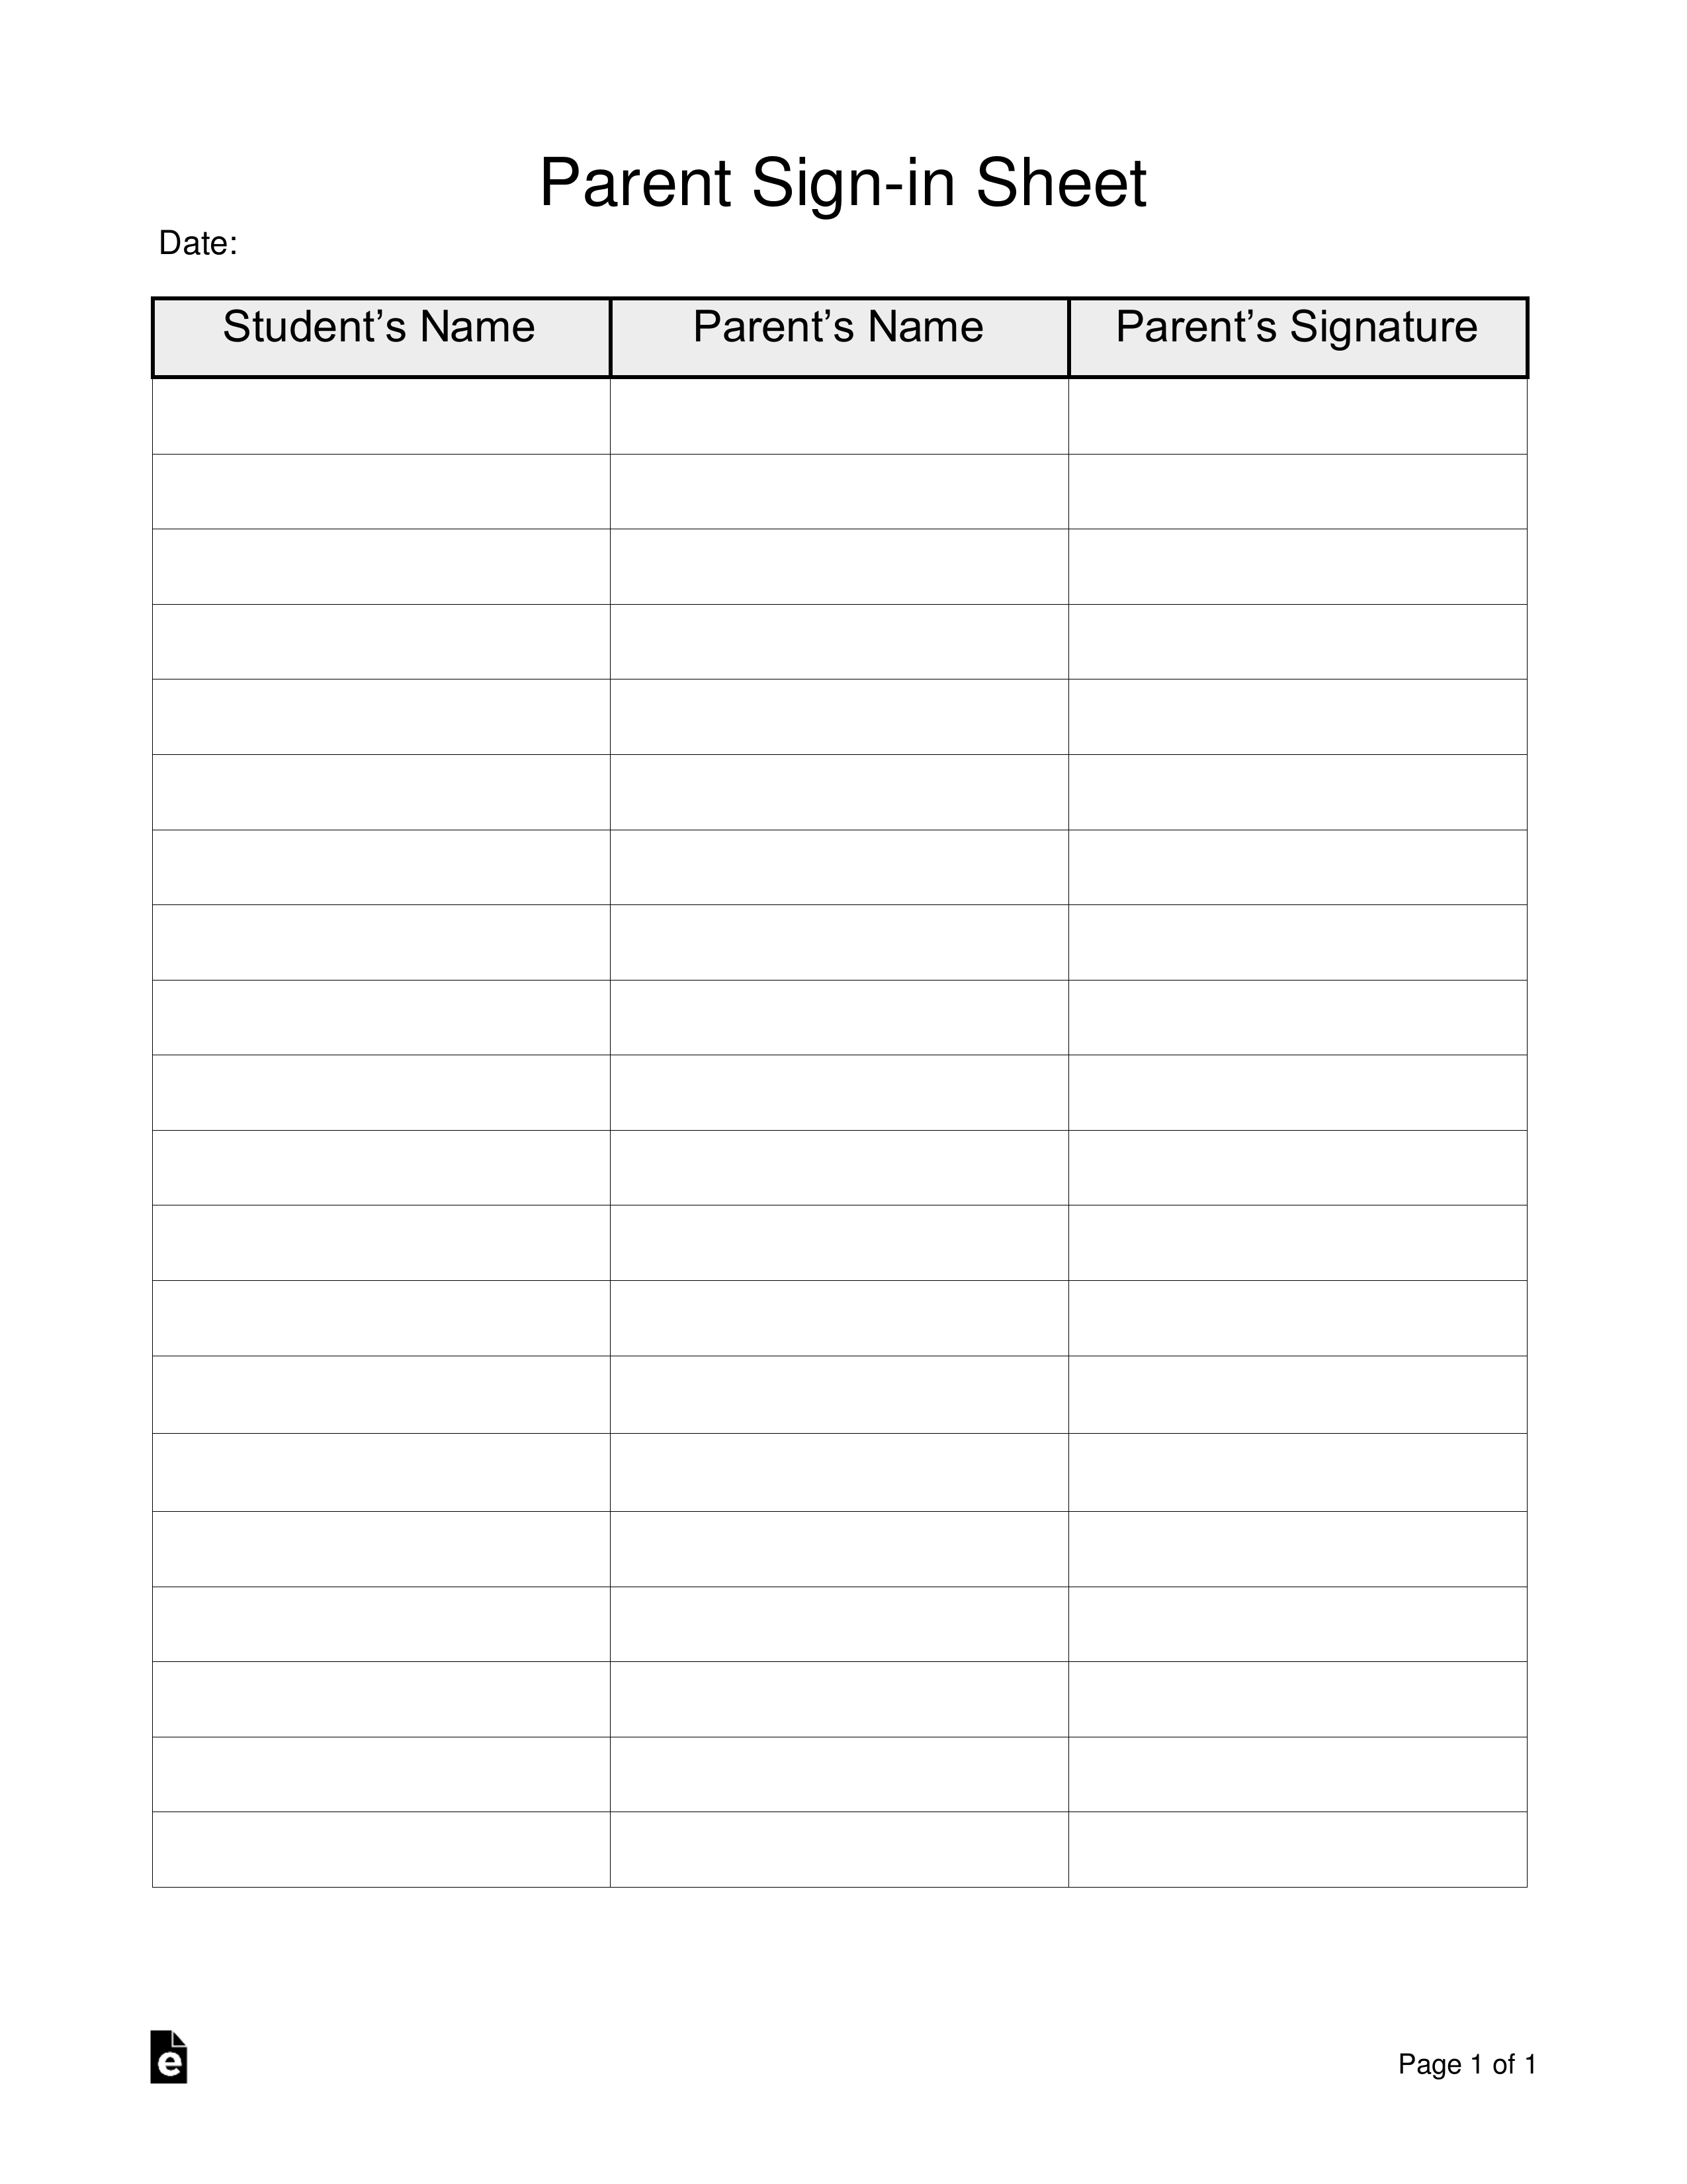 Parent Sign-in Sheet Template